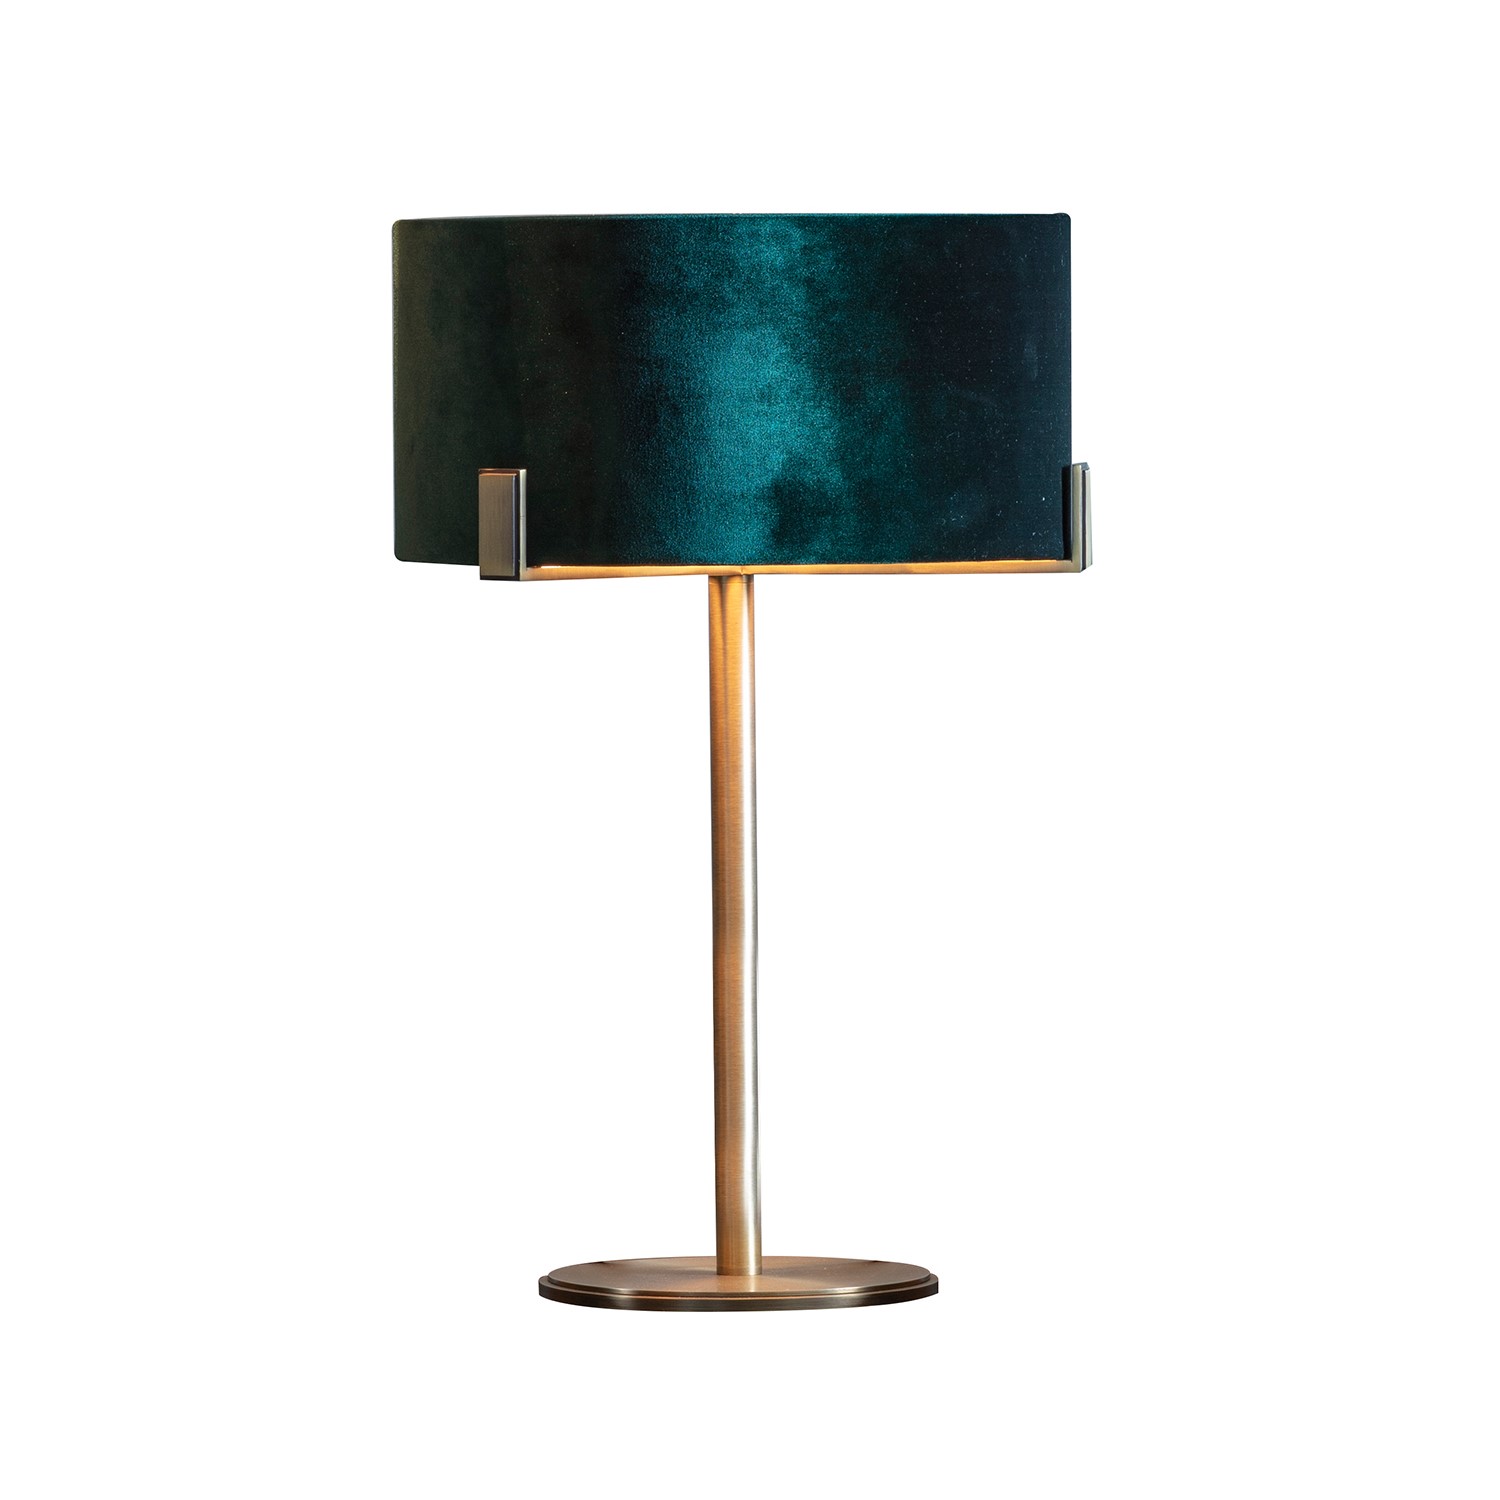 green table lamps